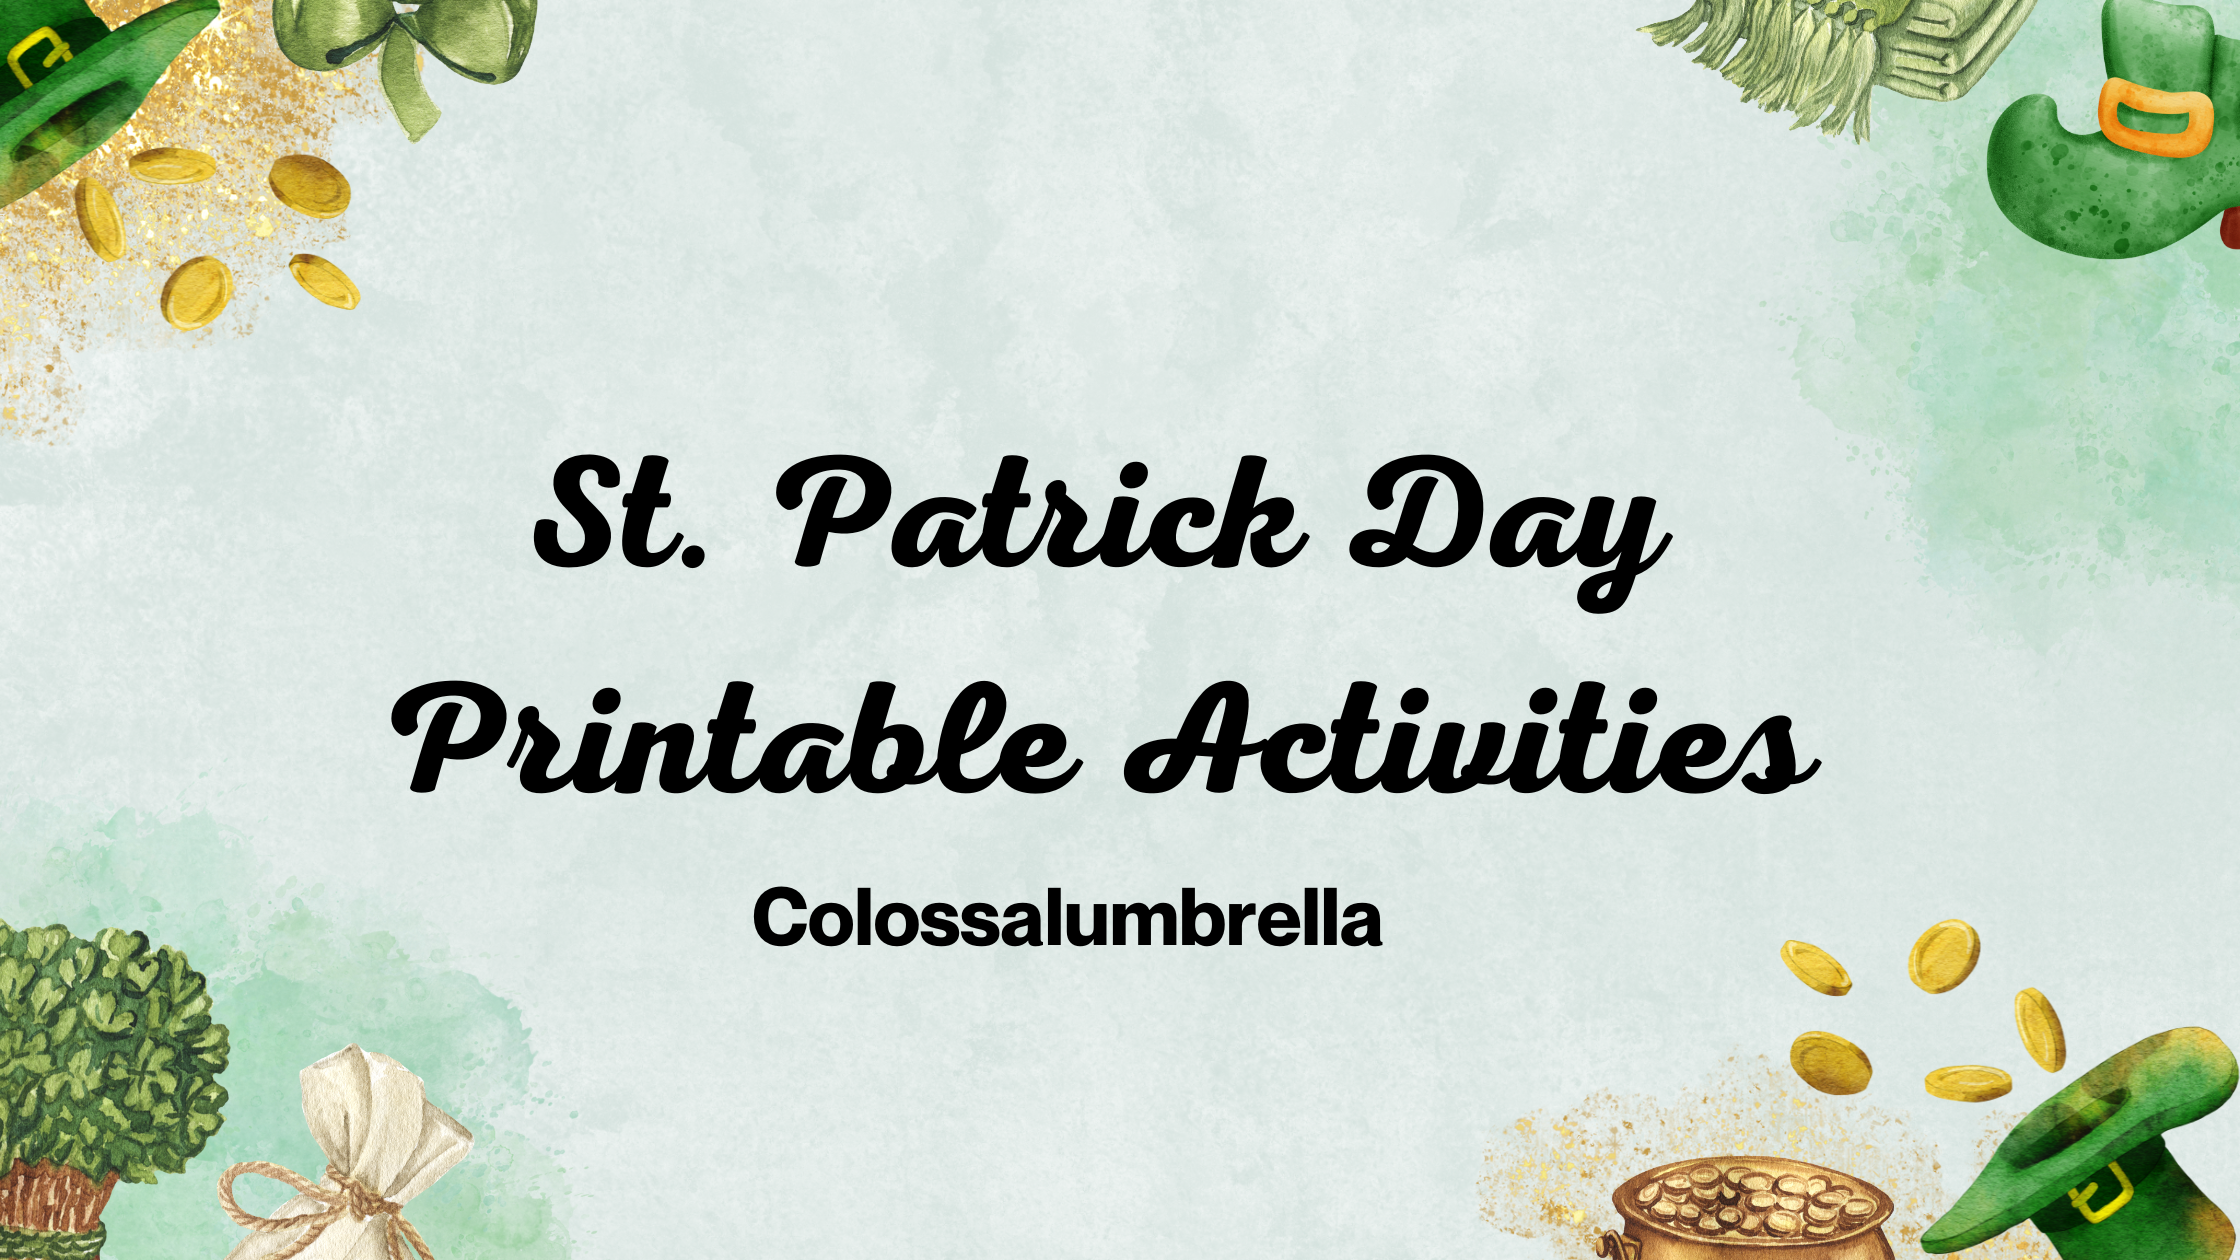 St. Patrick Day Printable Activities